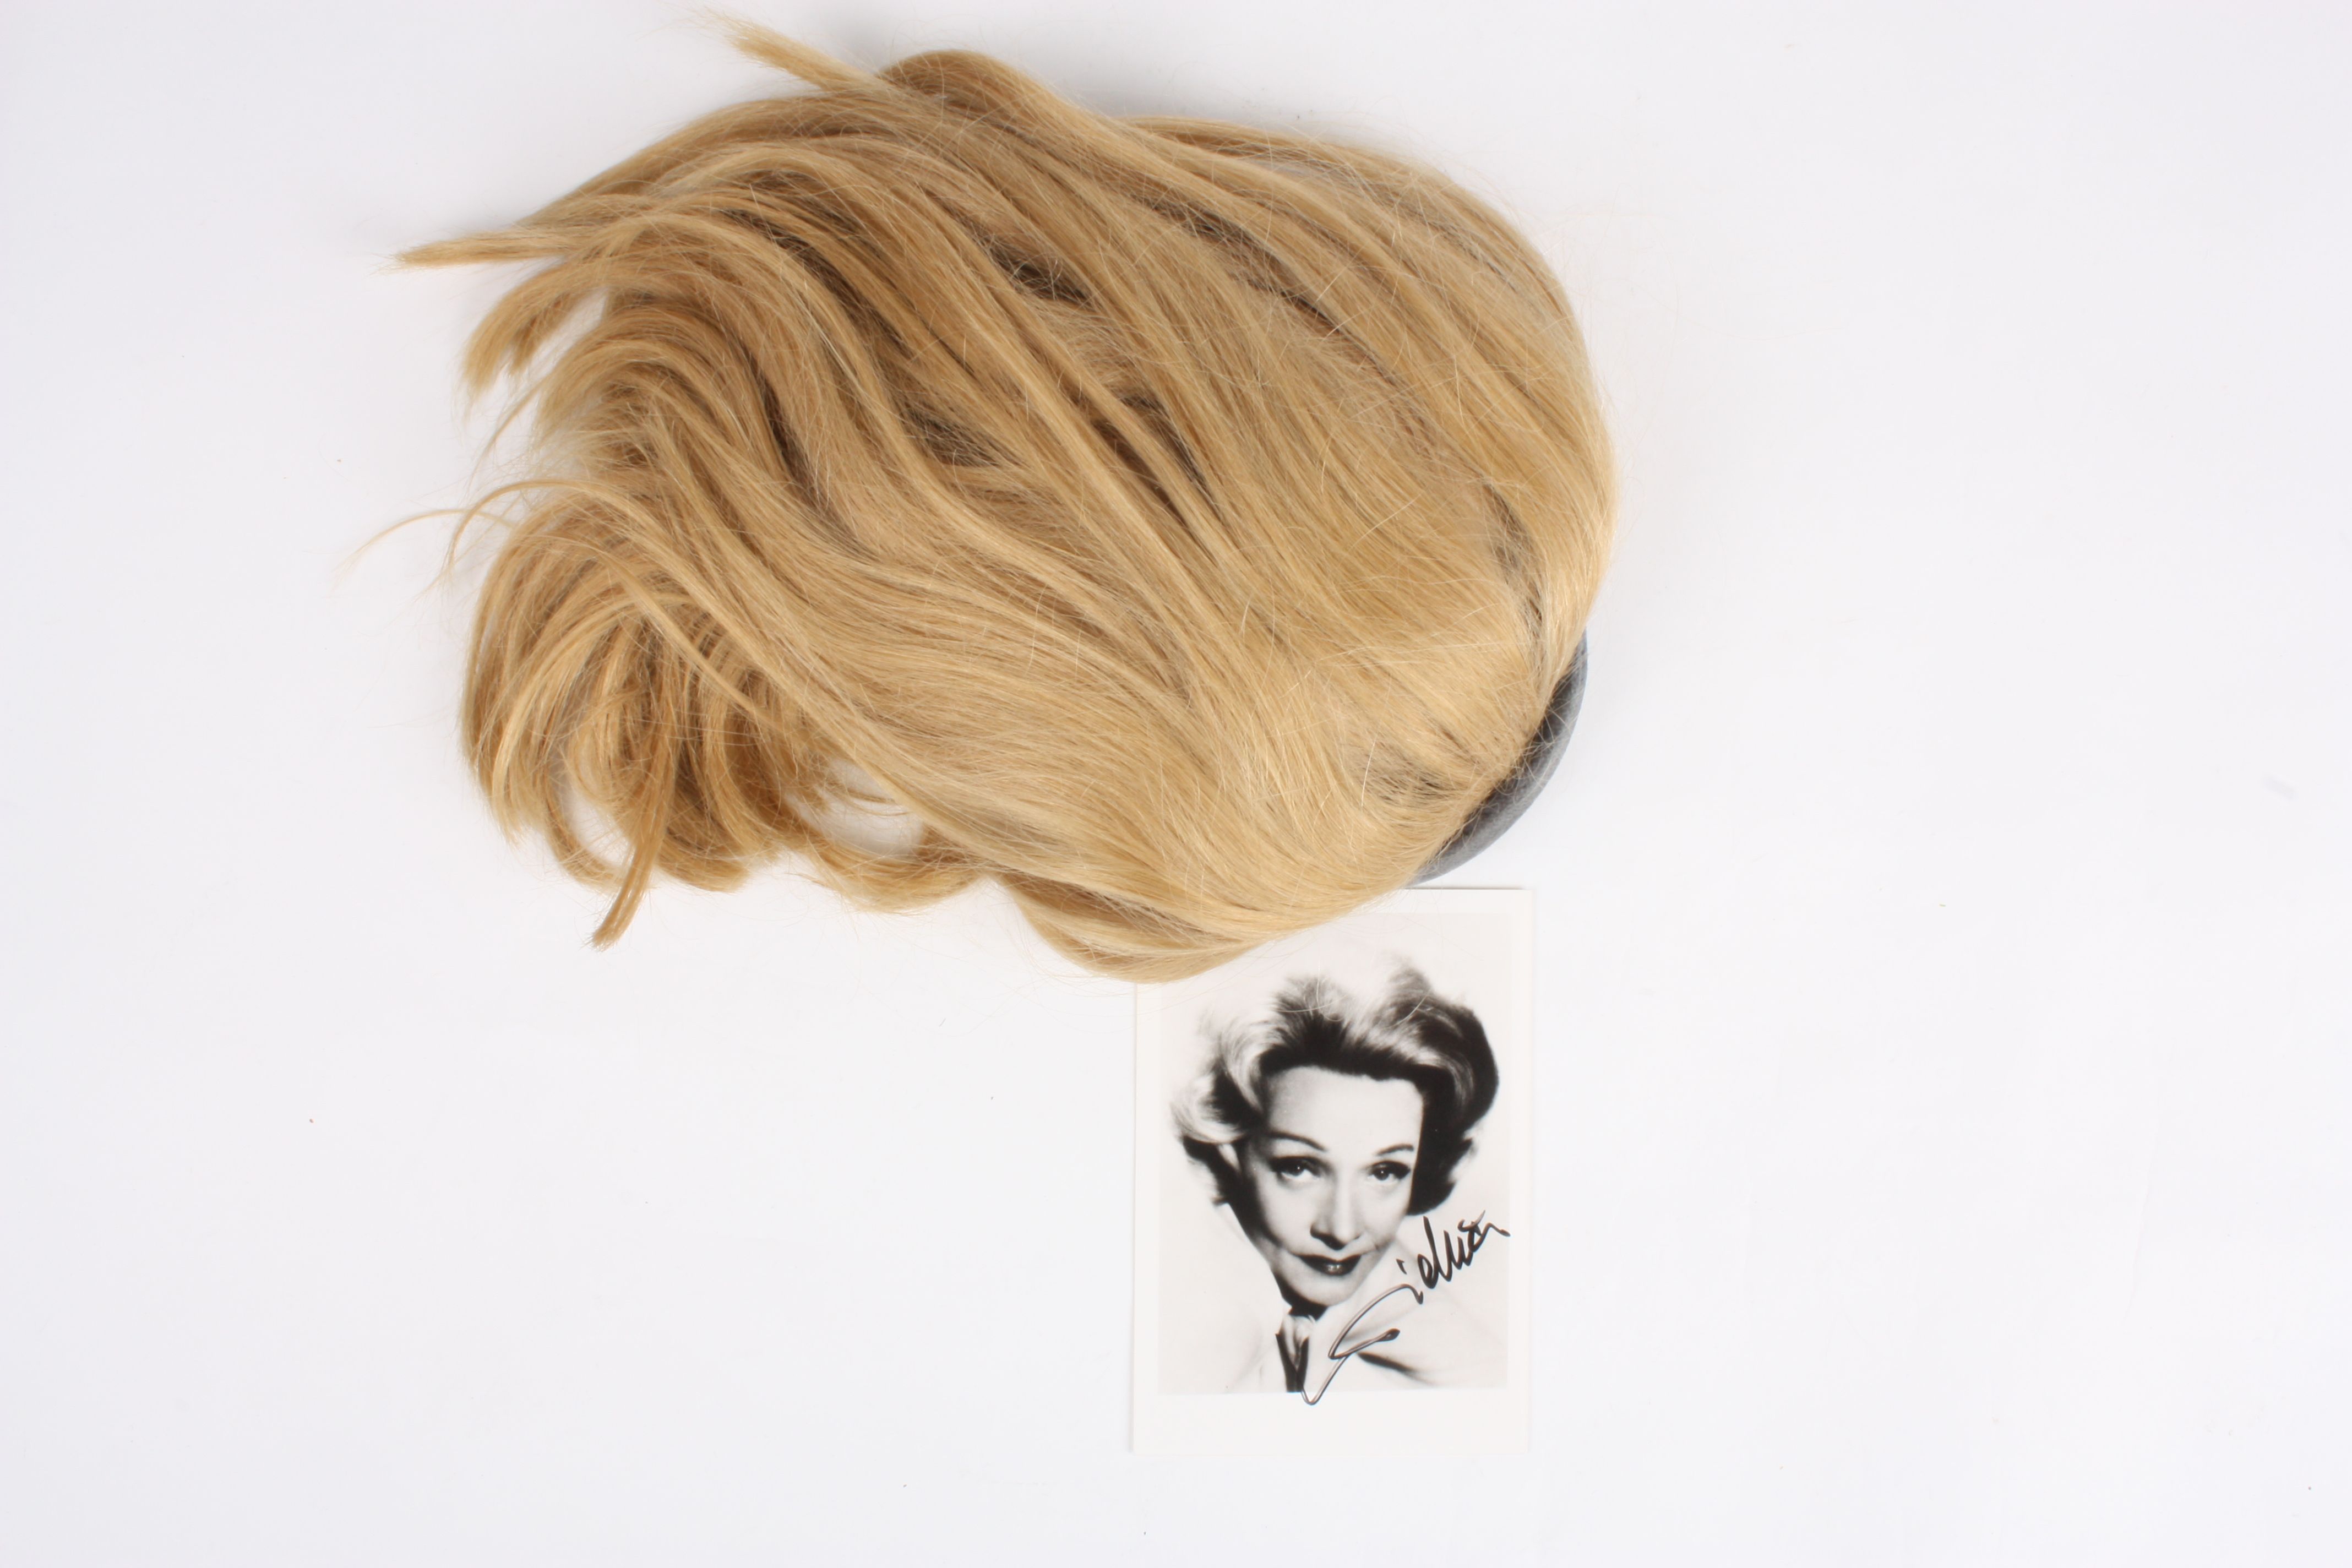 A hairpiece believed to have been worn by Marlene Dietrich
of ash blonde colour with alice band